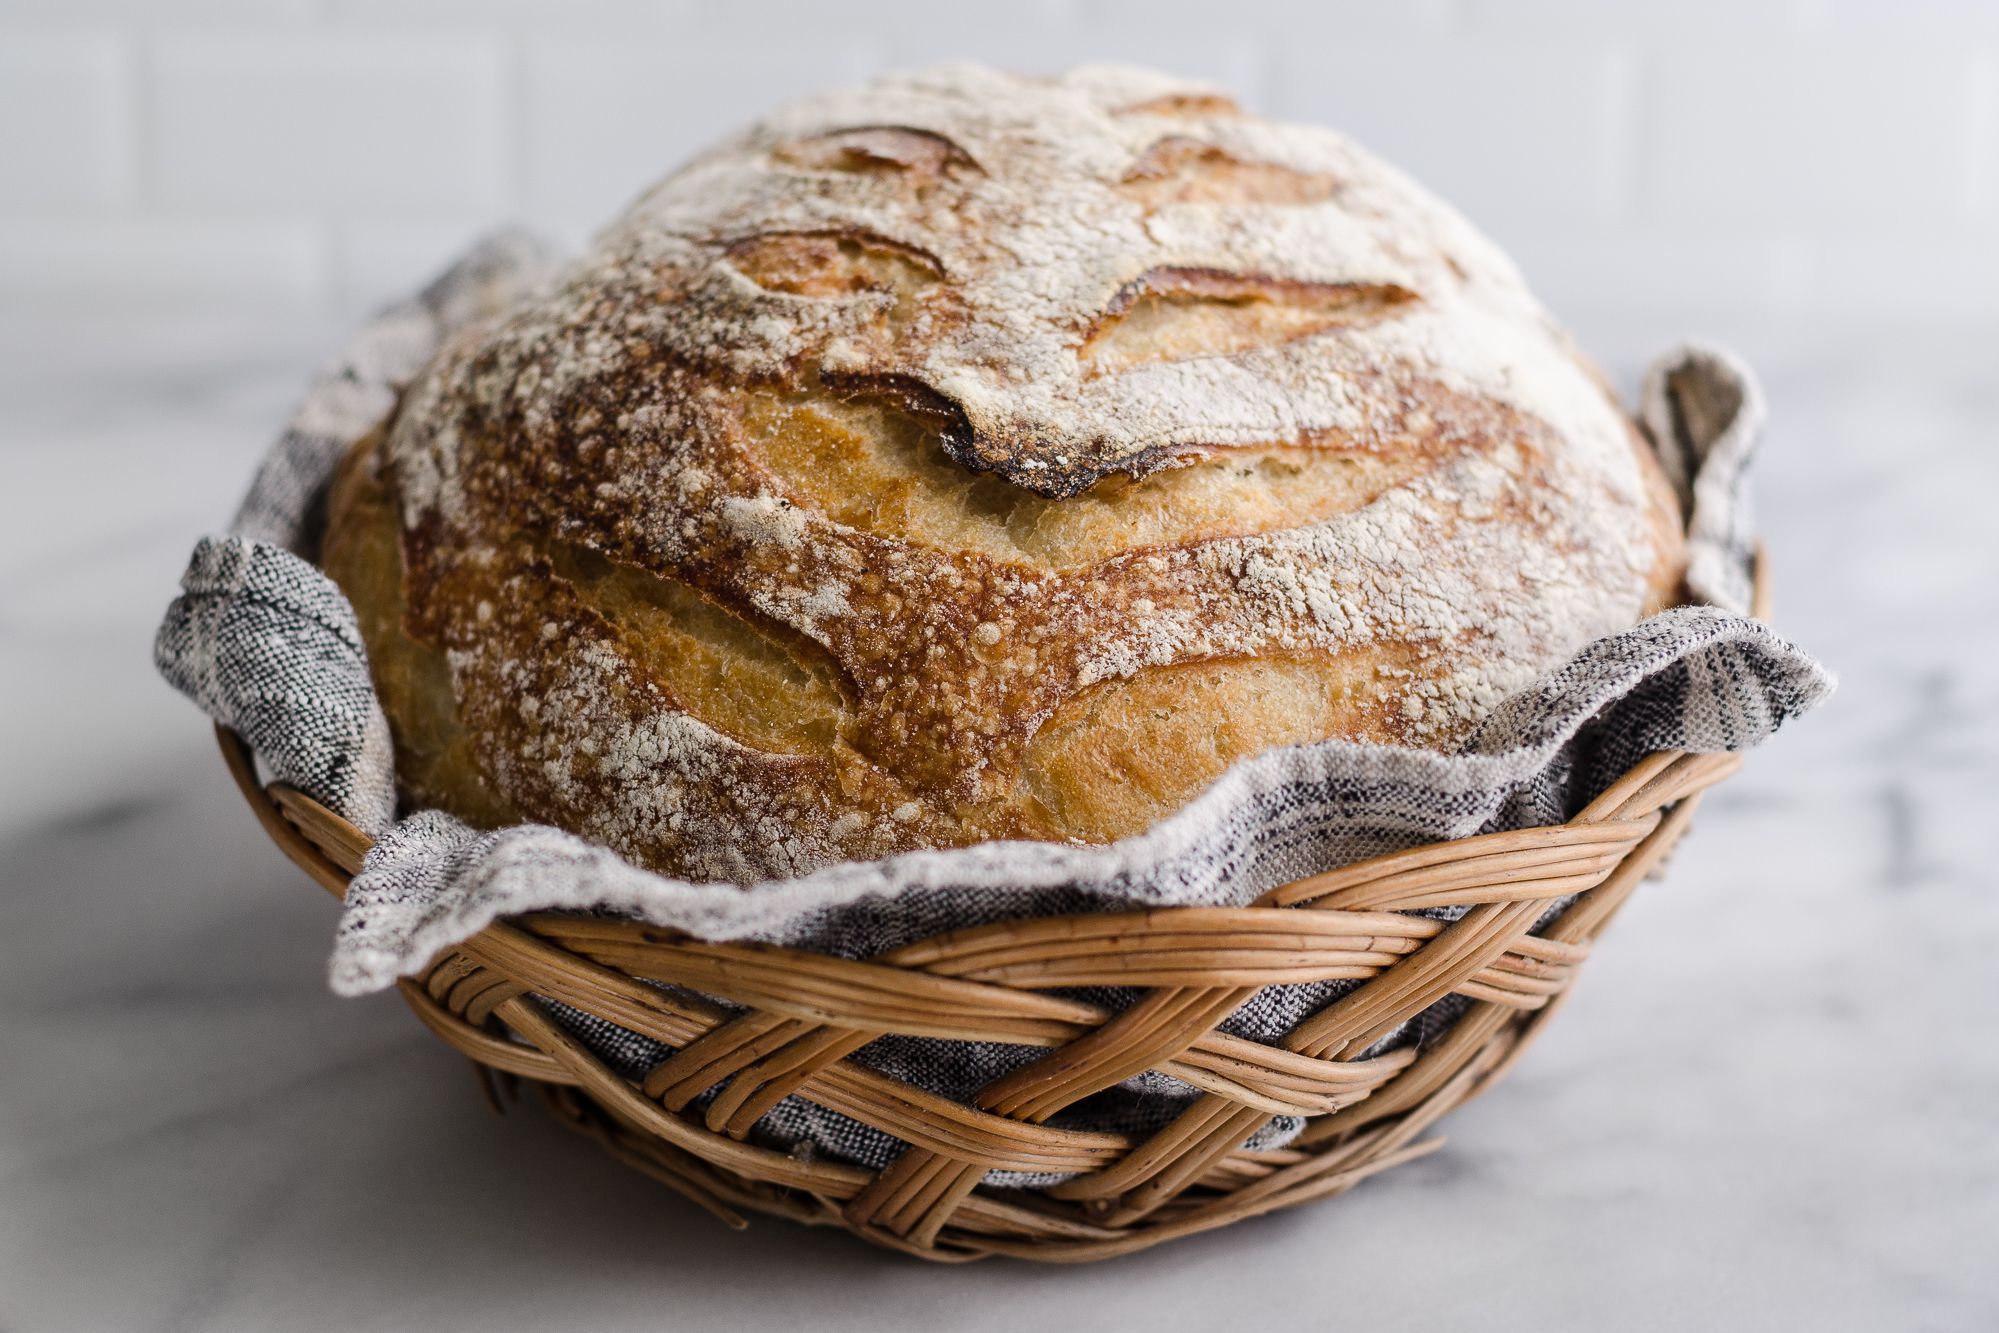 https://hips.hearstapps.com/thepioneerwoman/wp-content/uploads/2018/10/how-to-make-artisan-sourdough-bread-at-home-01.jpg